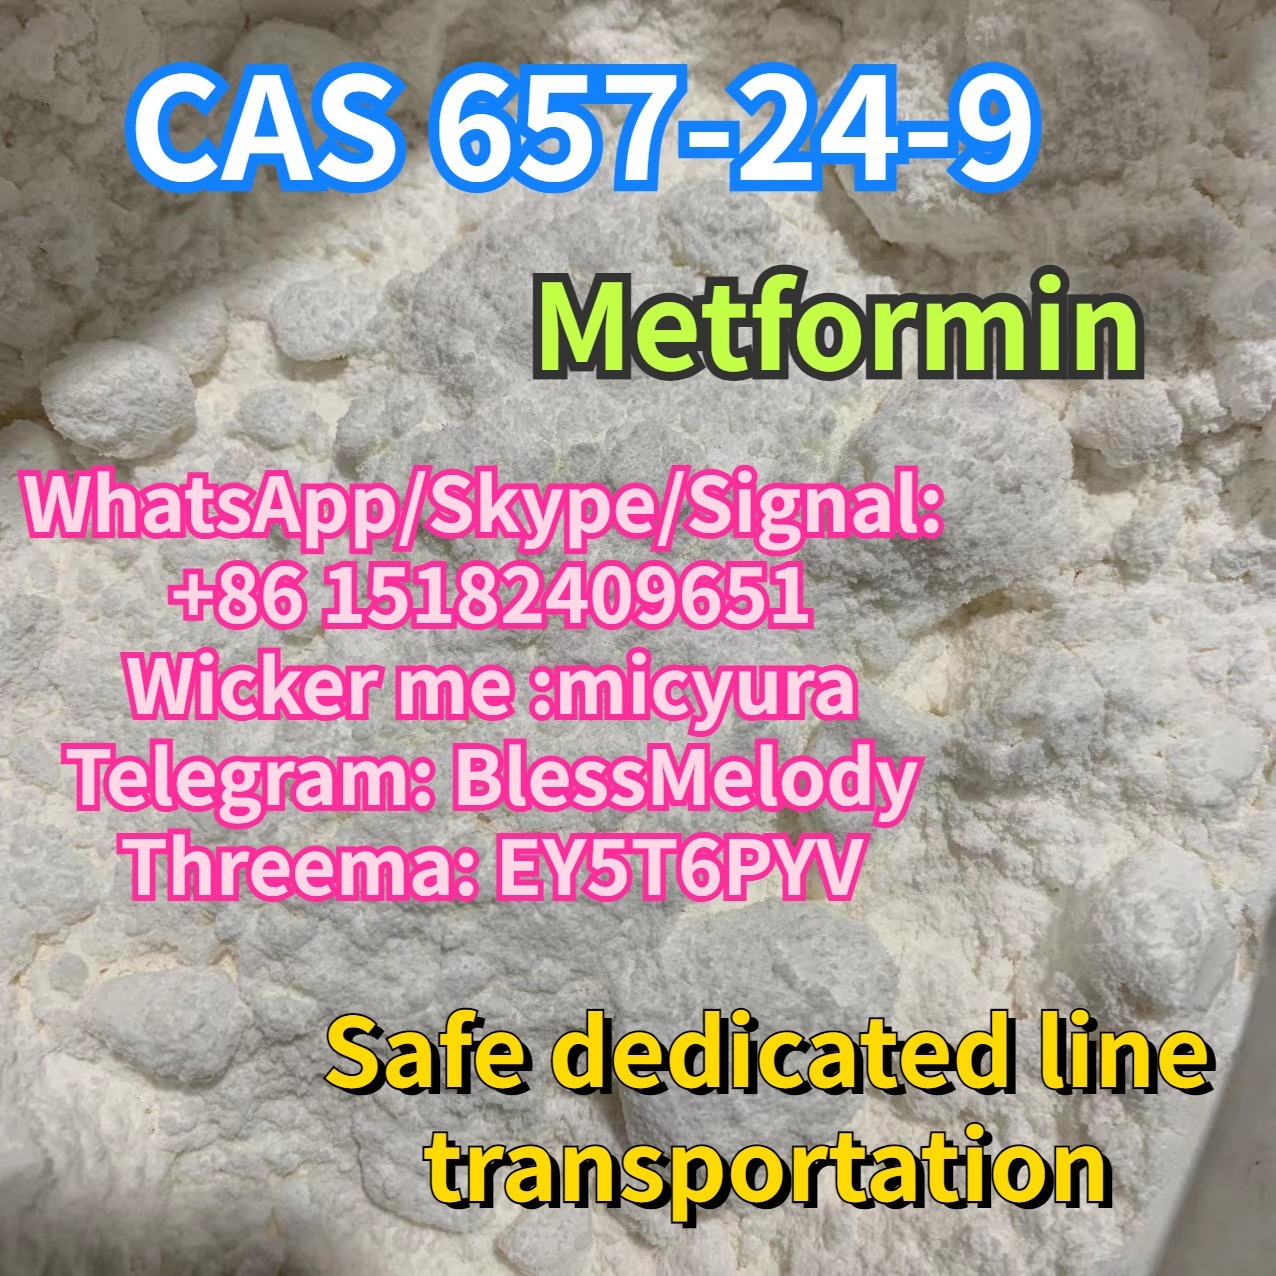 Hot Product Metformin CAS 657-24-9 Safe delivery to Netherlands/Australia/EU/USA/Germany/Russia